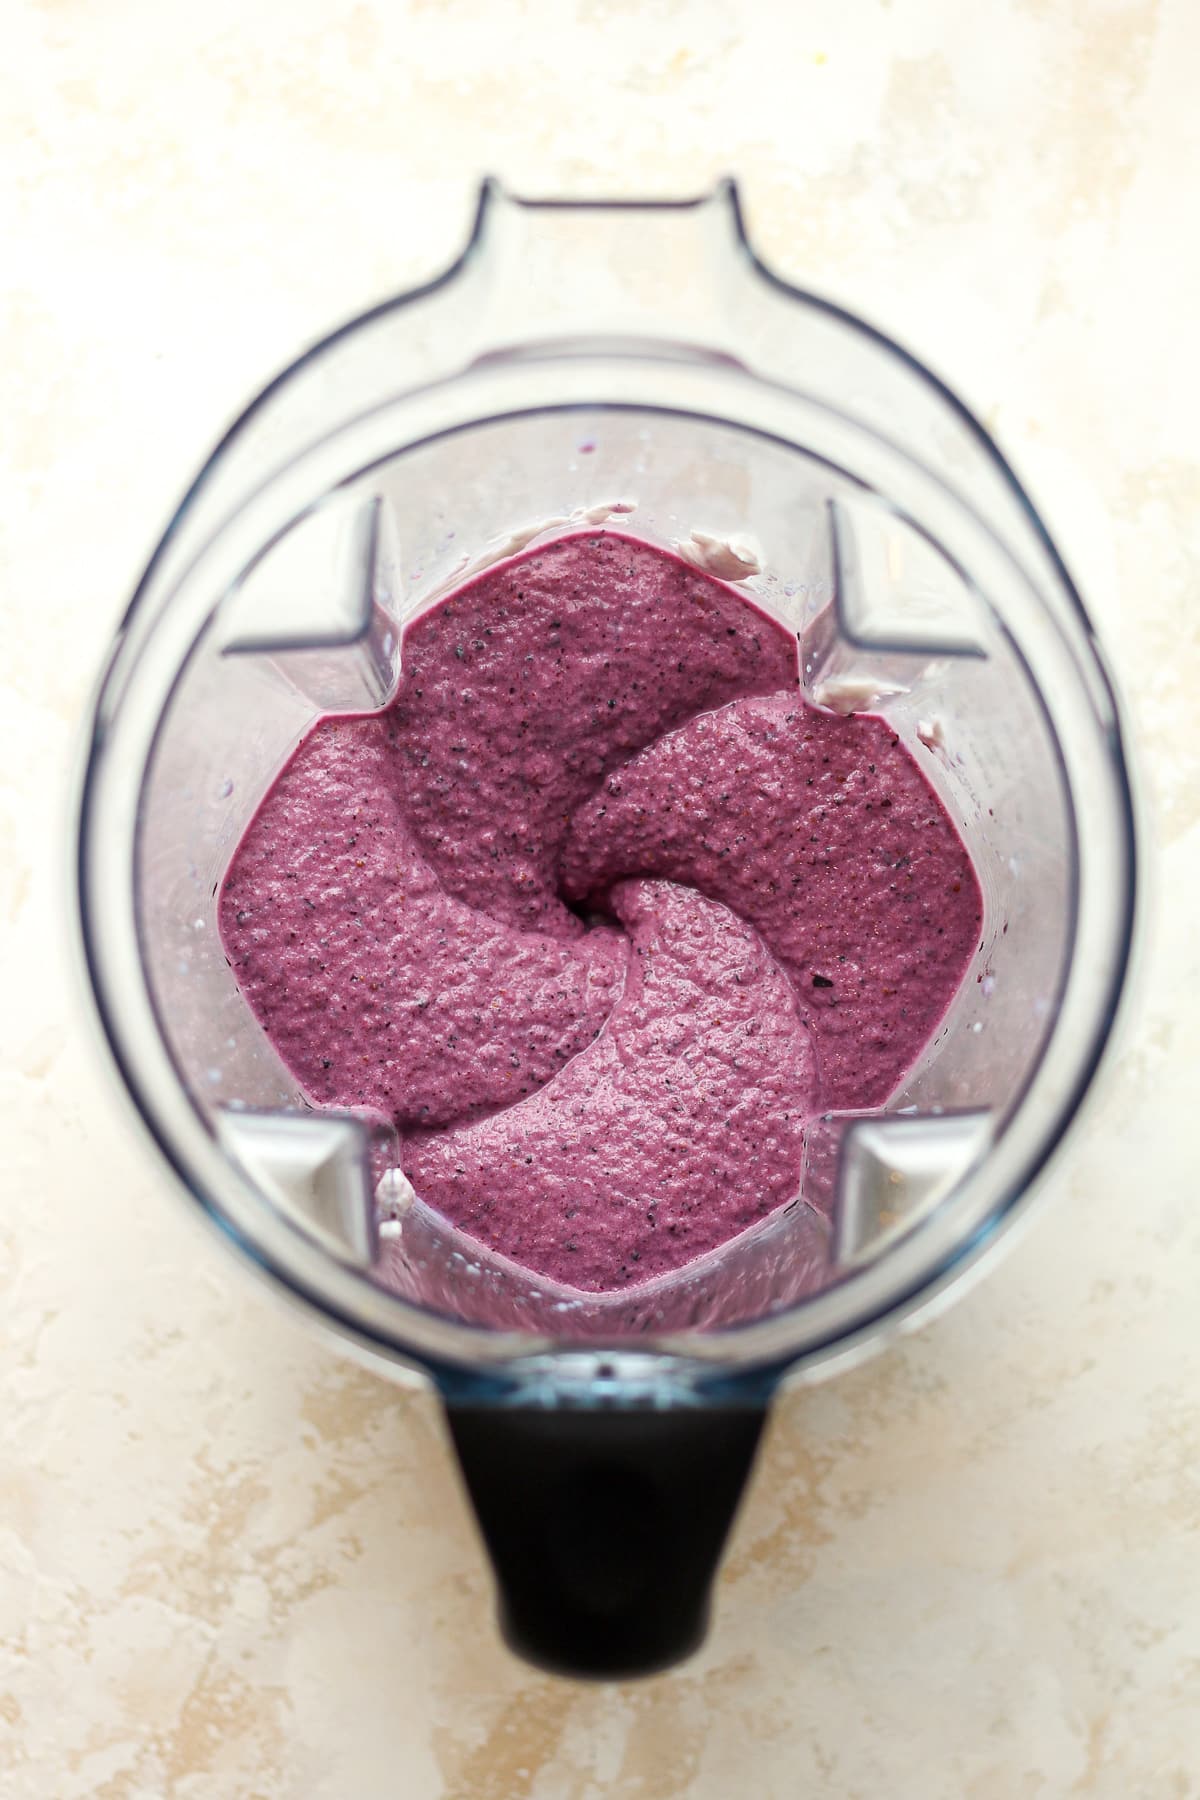 A blender of the blueberry puree.